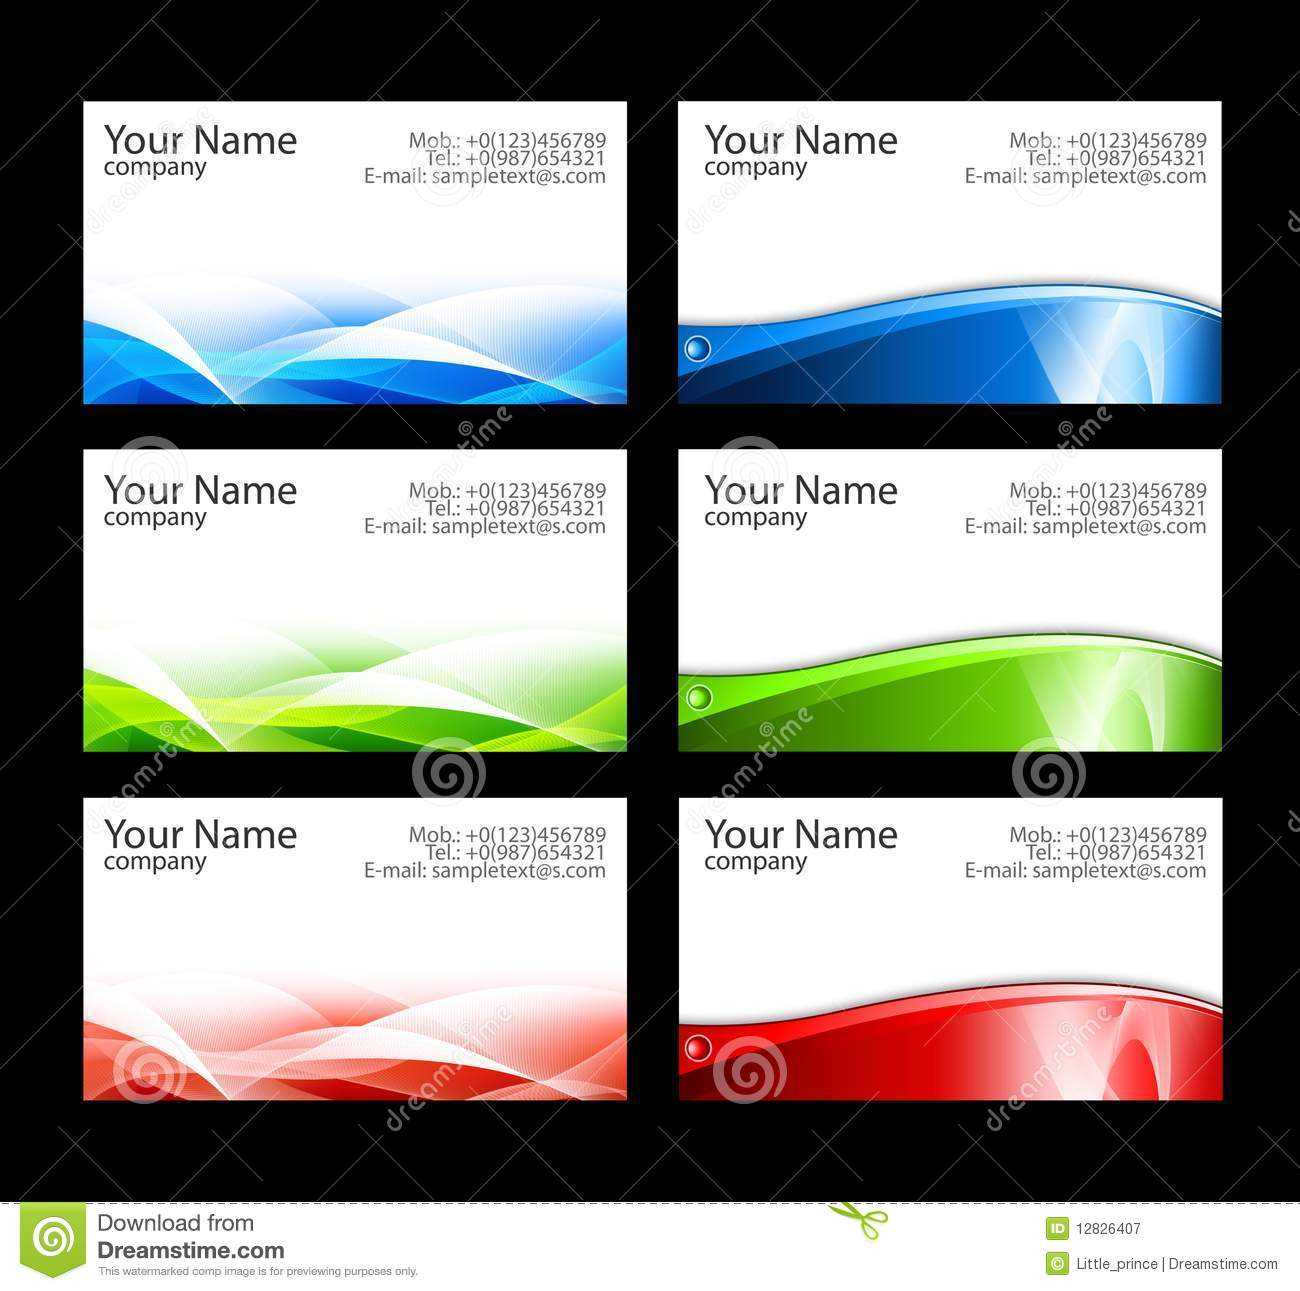 Business Cards Templates Stock Illustration. Illustration Of Regarding Free Complimentary Card Templates